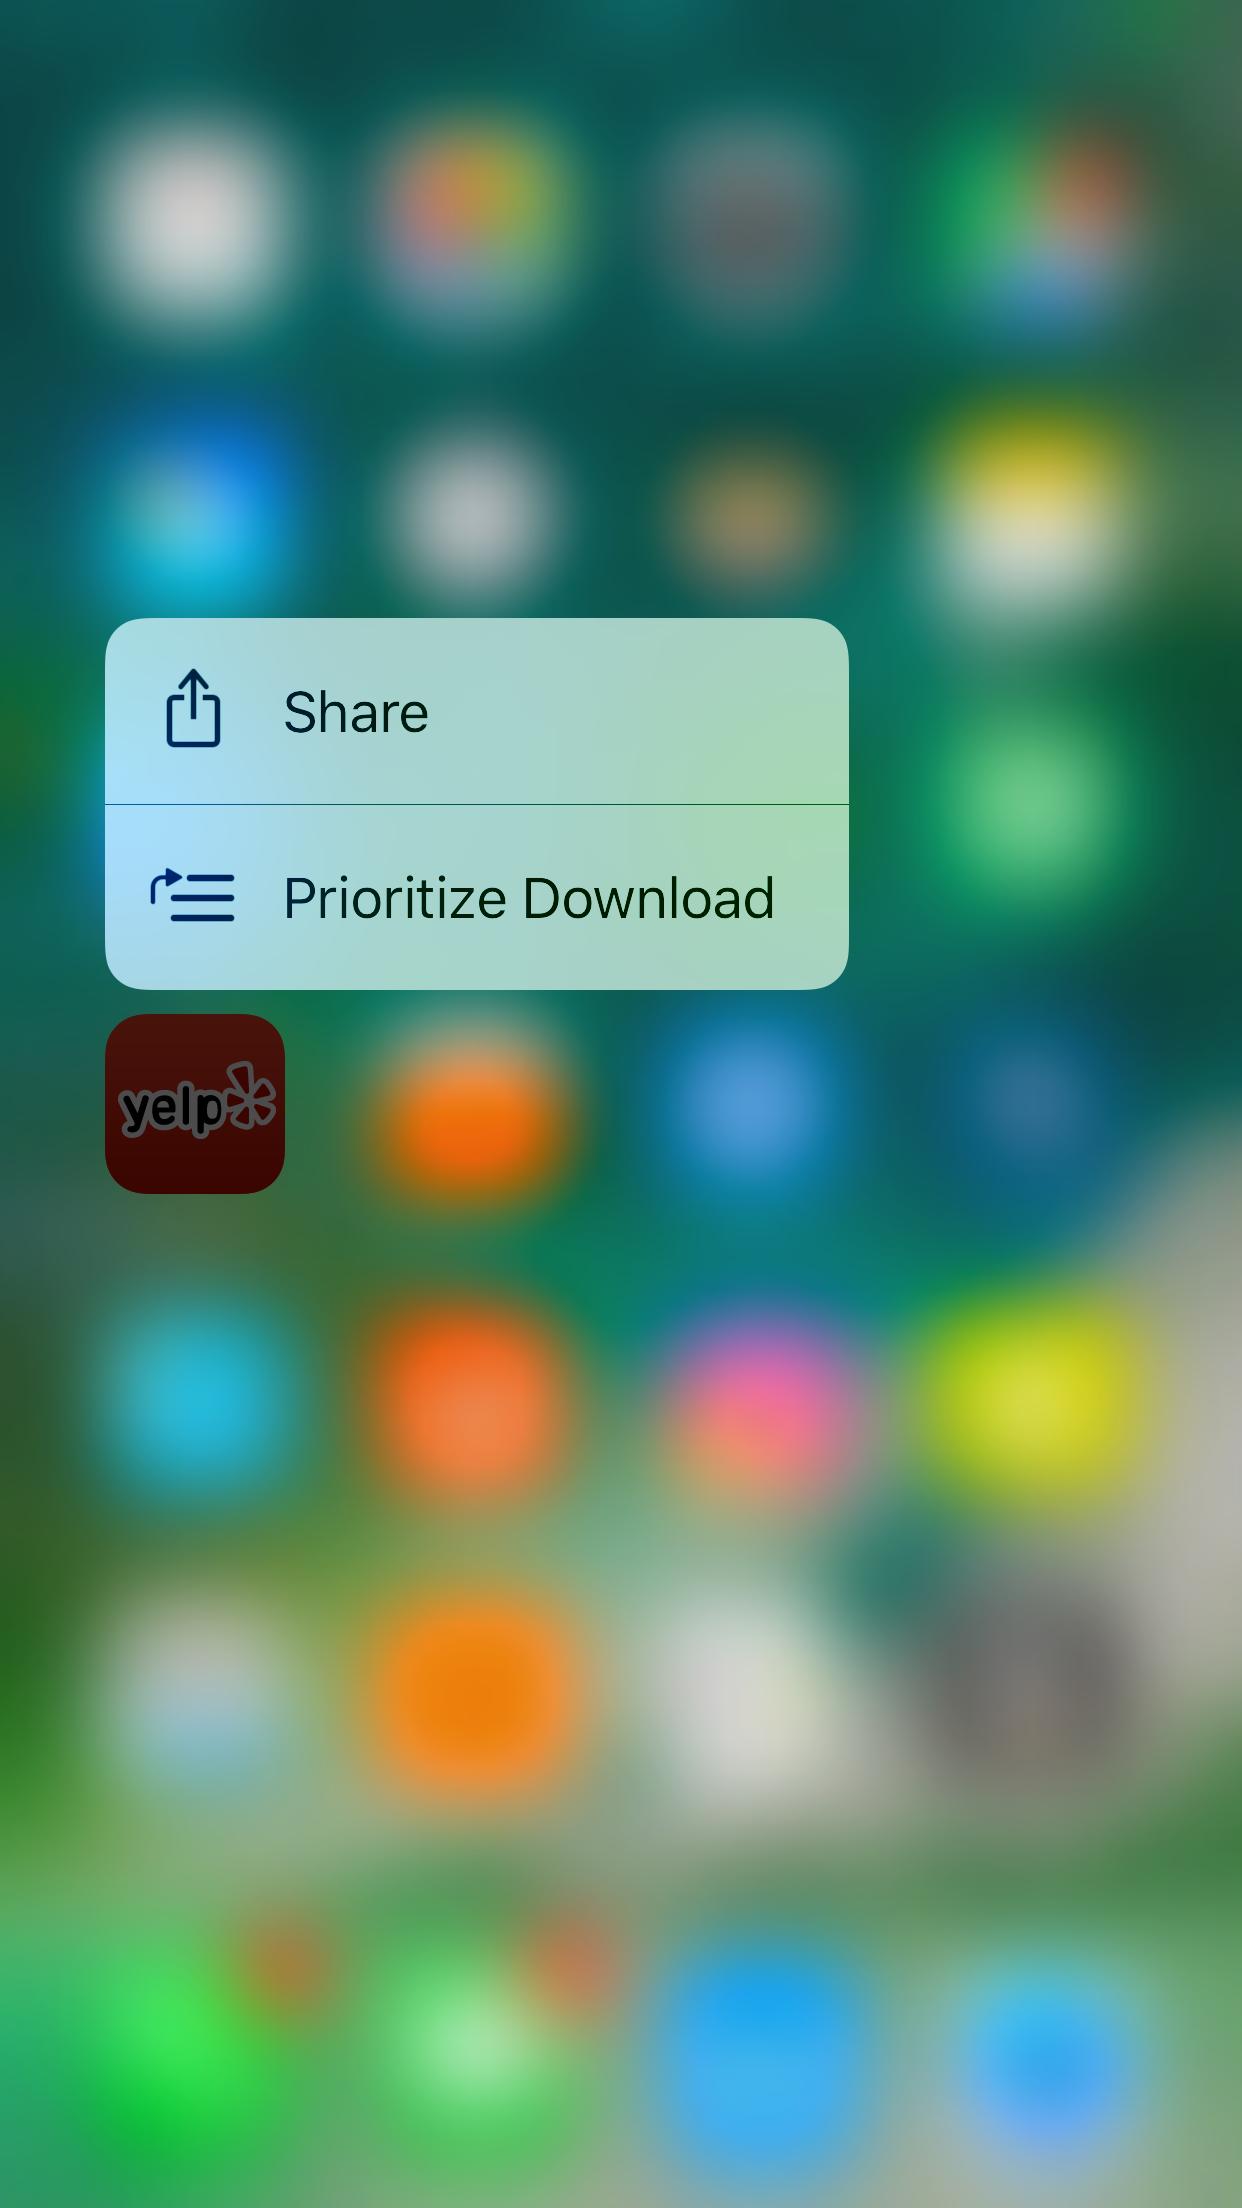 You Can Prioritize App Store Downloads in iOS 10 With a Force Touch Quick Action